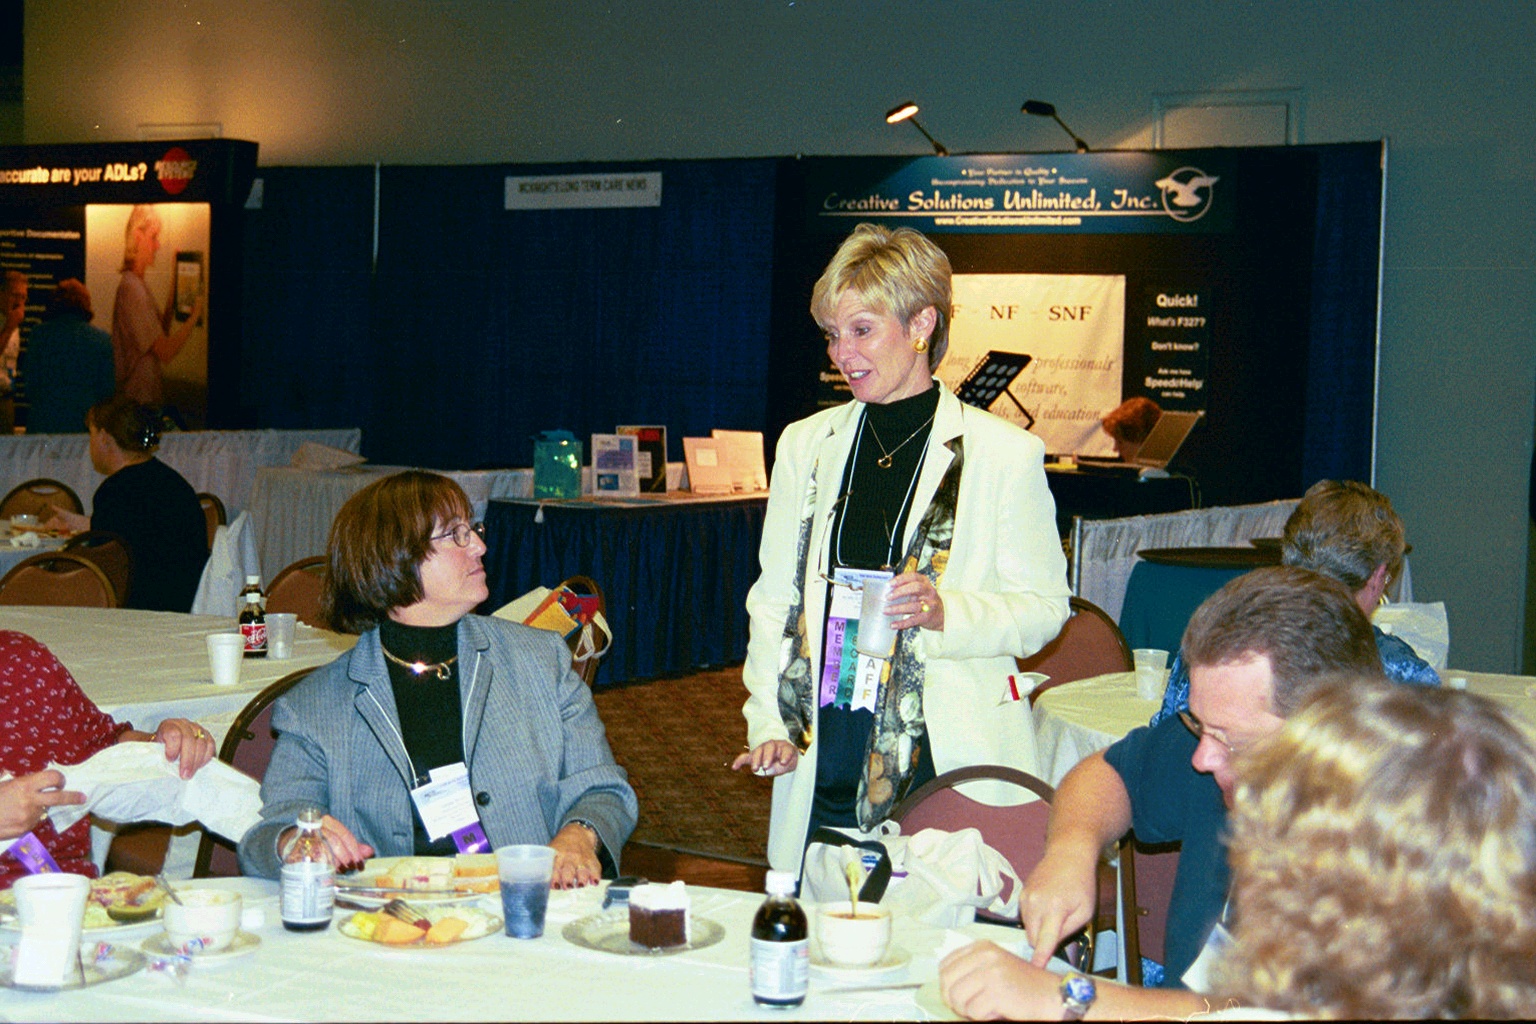 Diane Carter speaking with members at the Fall 2002 Conference in Chicago